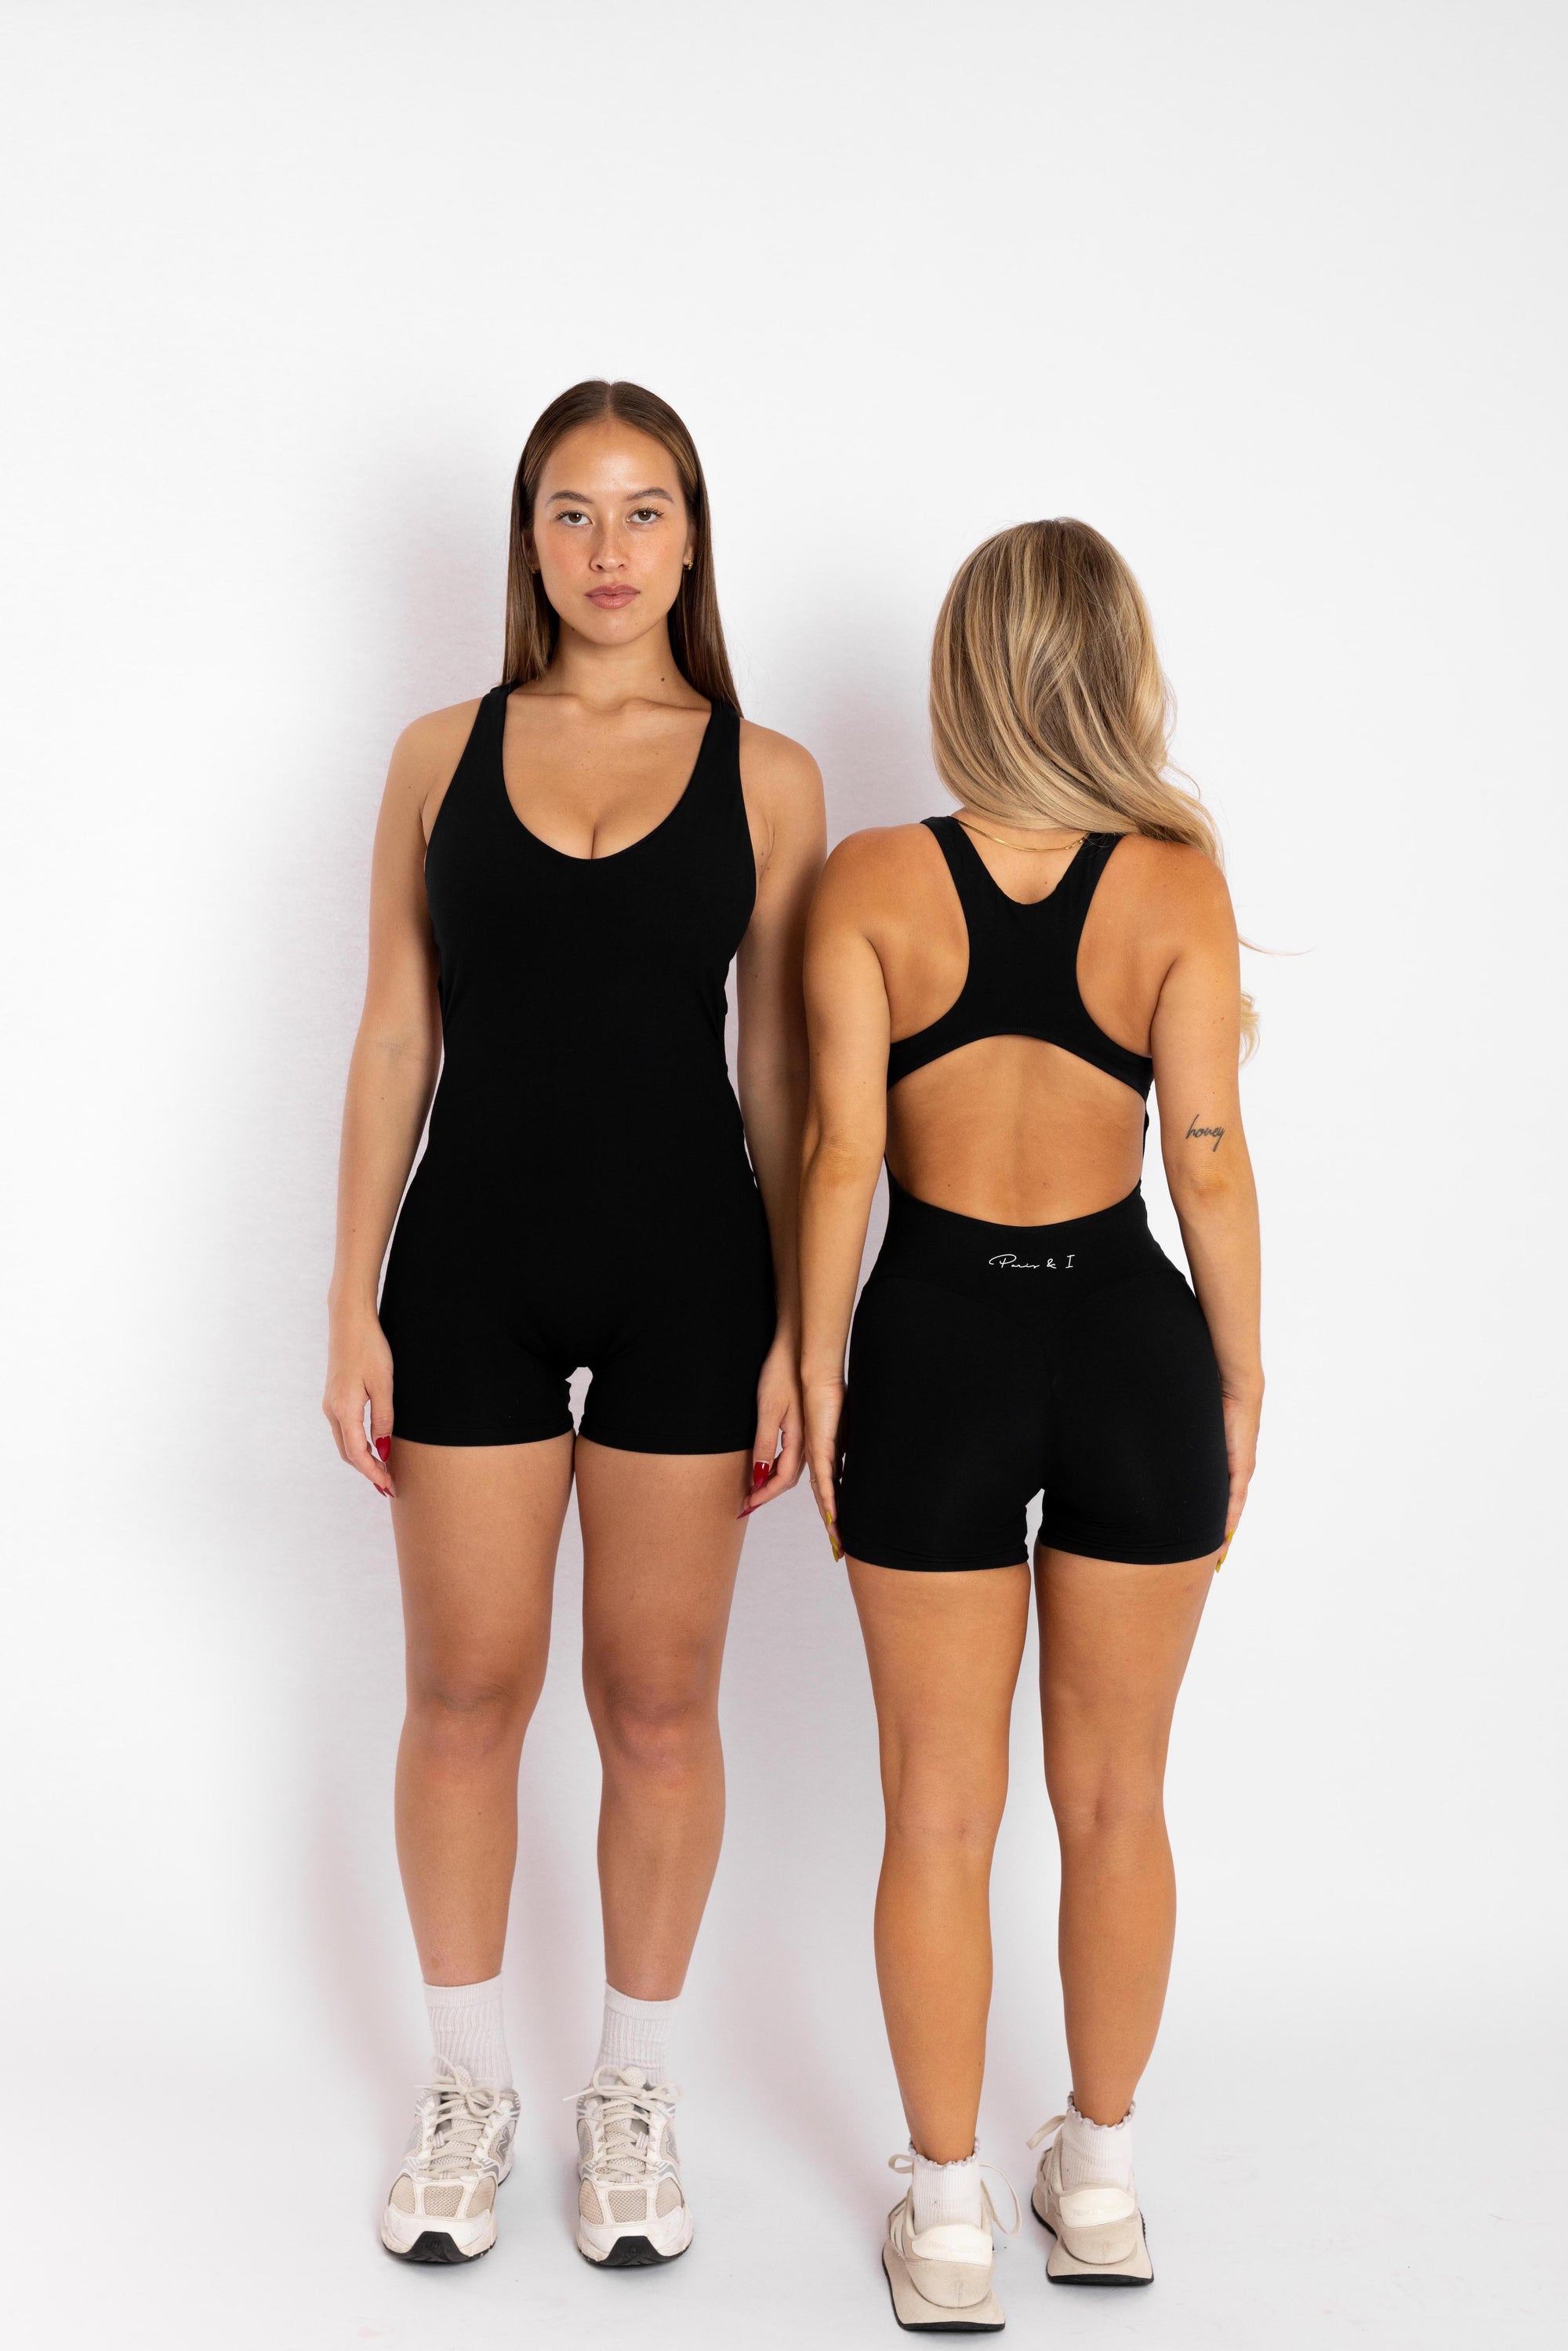 Are Unitards/Playsuits Comfortable & Camel Toe Free?